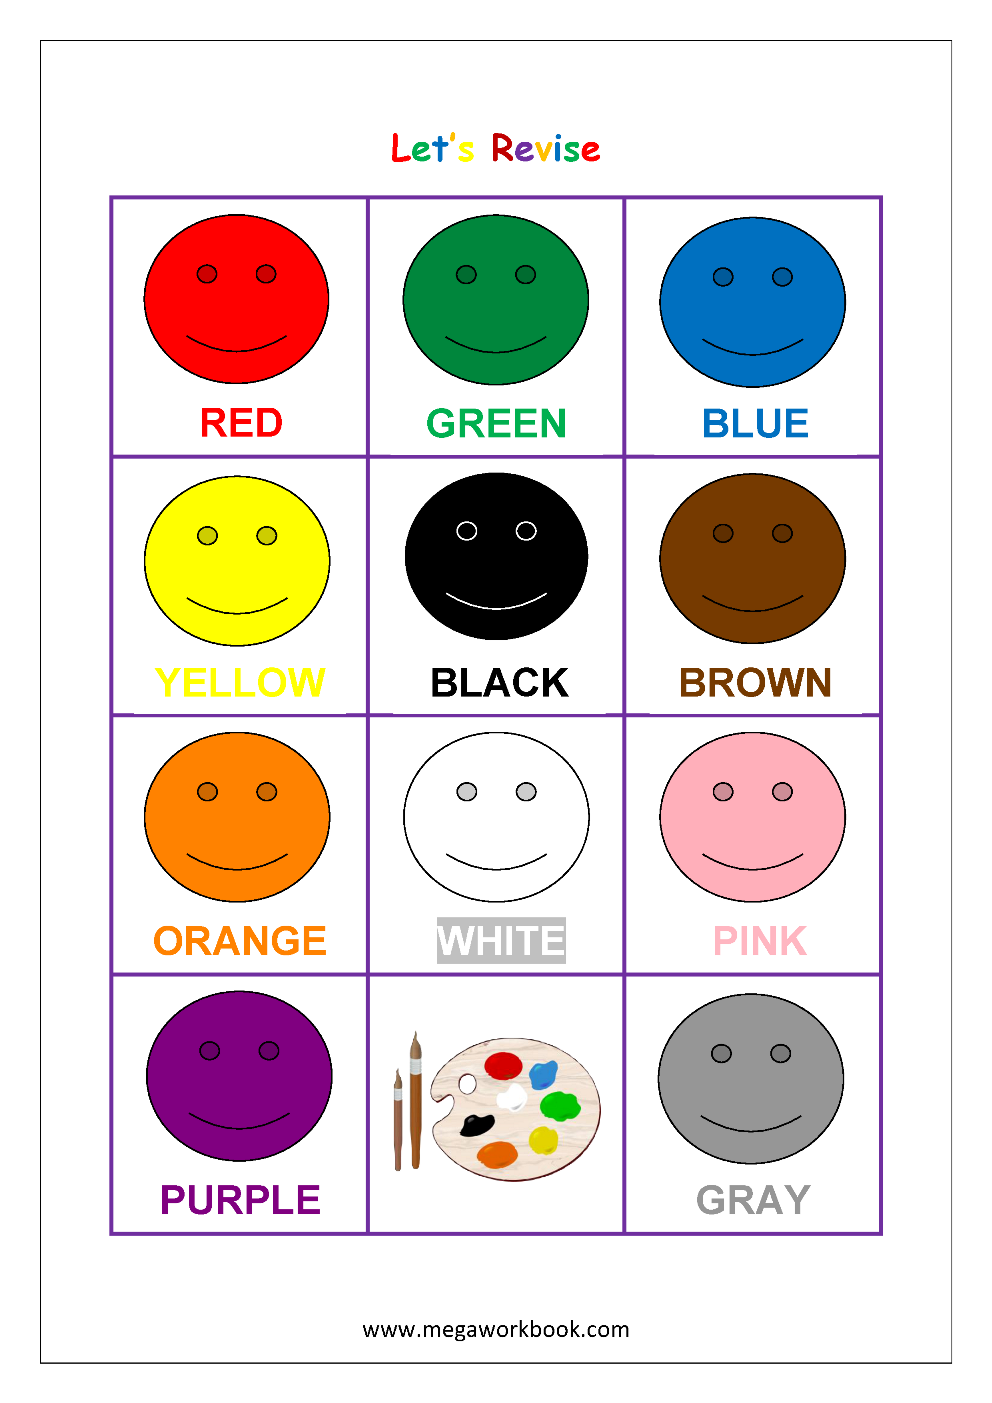 Learn Colors Learn Colors For Kids Learning Colors For Toddler Learn Colors Baby Learn Basic Colors Free Printables Red Things Blue Things Green Things Yellow Things Purple Things Orange - Color Recognition Worksheets Free Printable